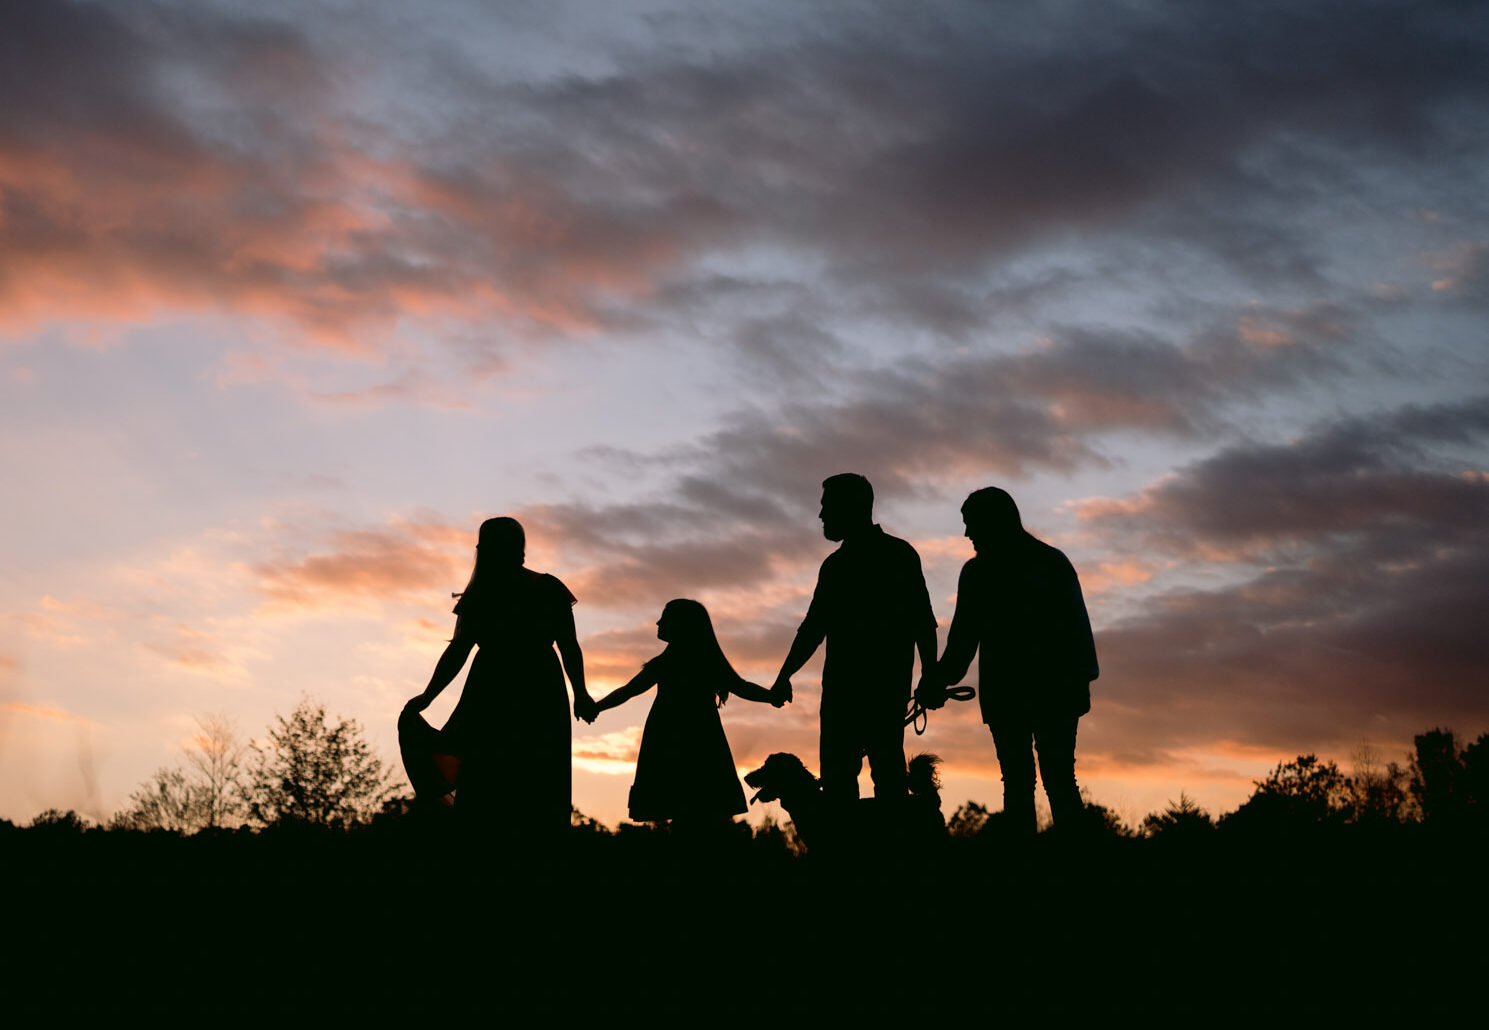 Family stands together holding hands in a field at sunset.